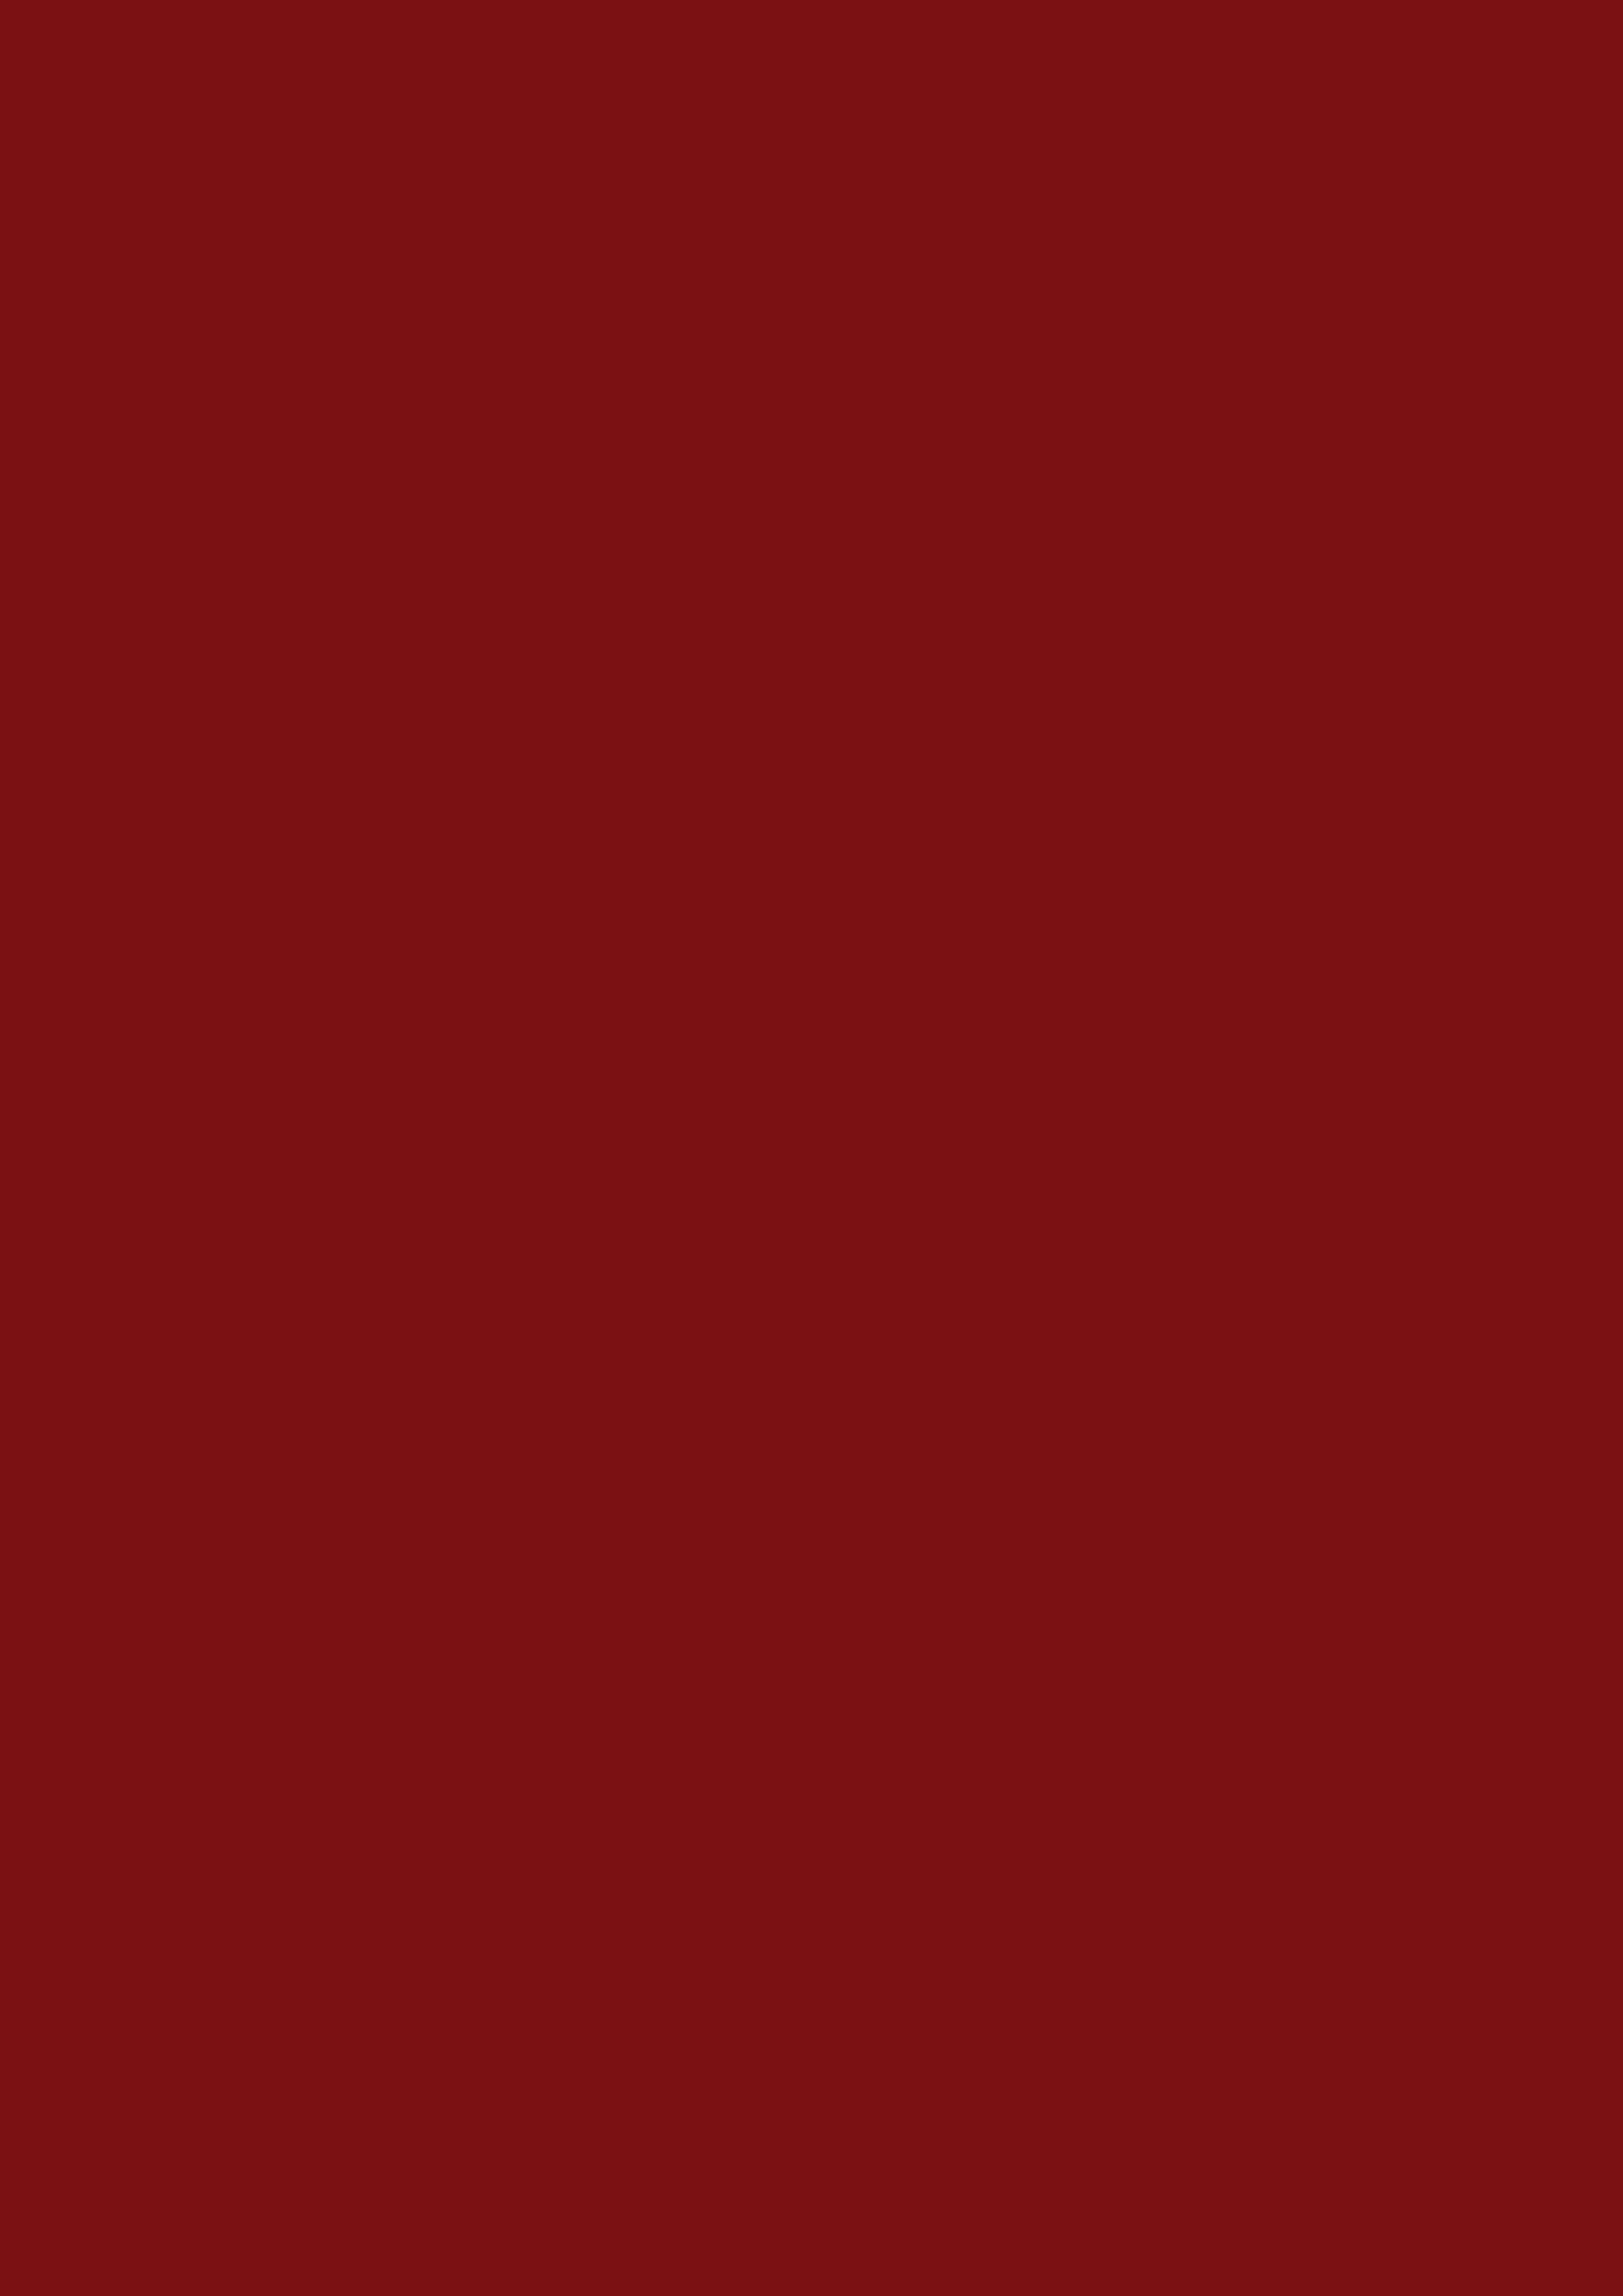 2480x3508 UP Maroon Solid Color Background